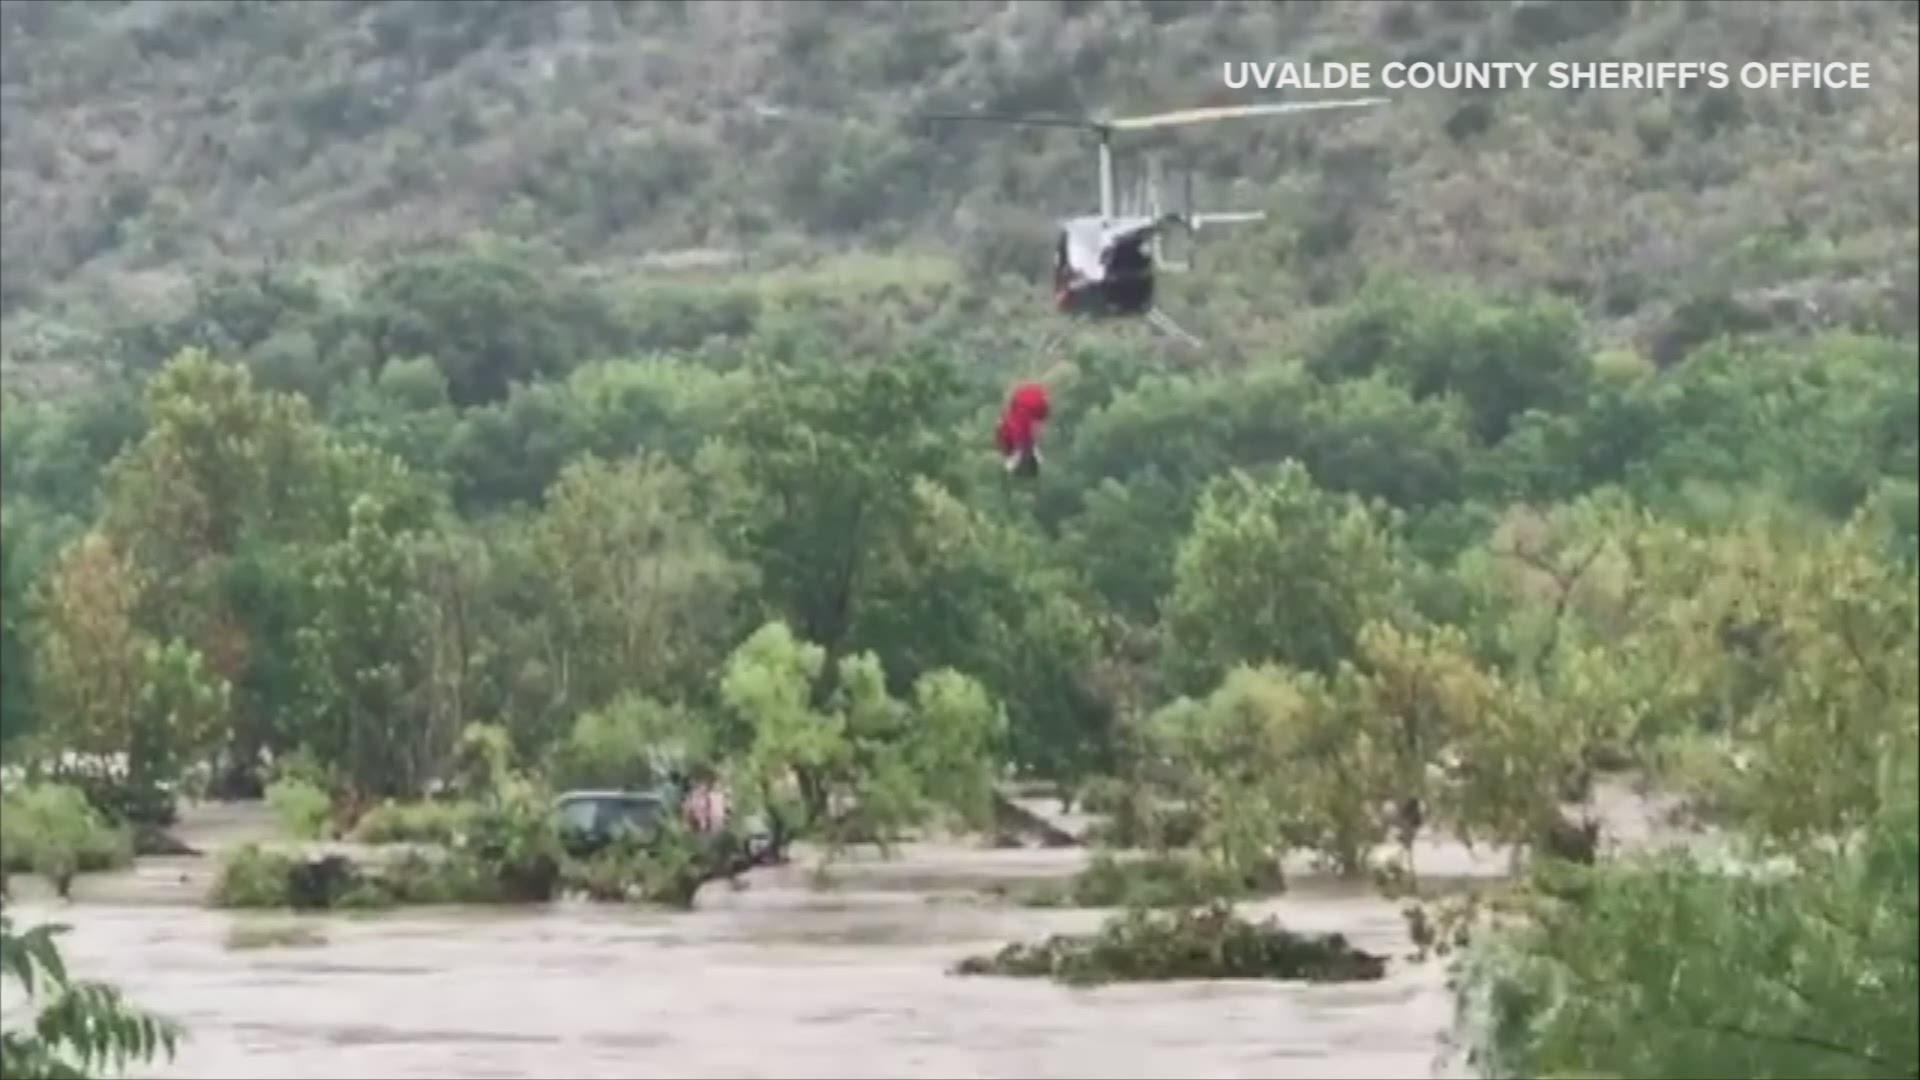 27 people were rescued in Uvalde County on Sunday as heavy rains led to flooding west of San Antonio. (Video: Uvalde County Sheriff's Office/Facebook)